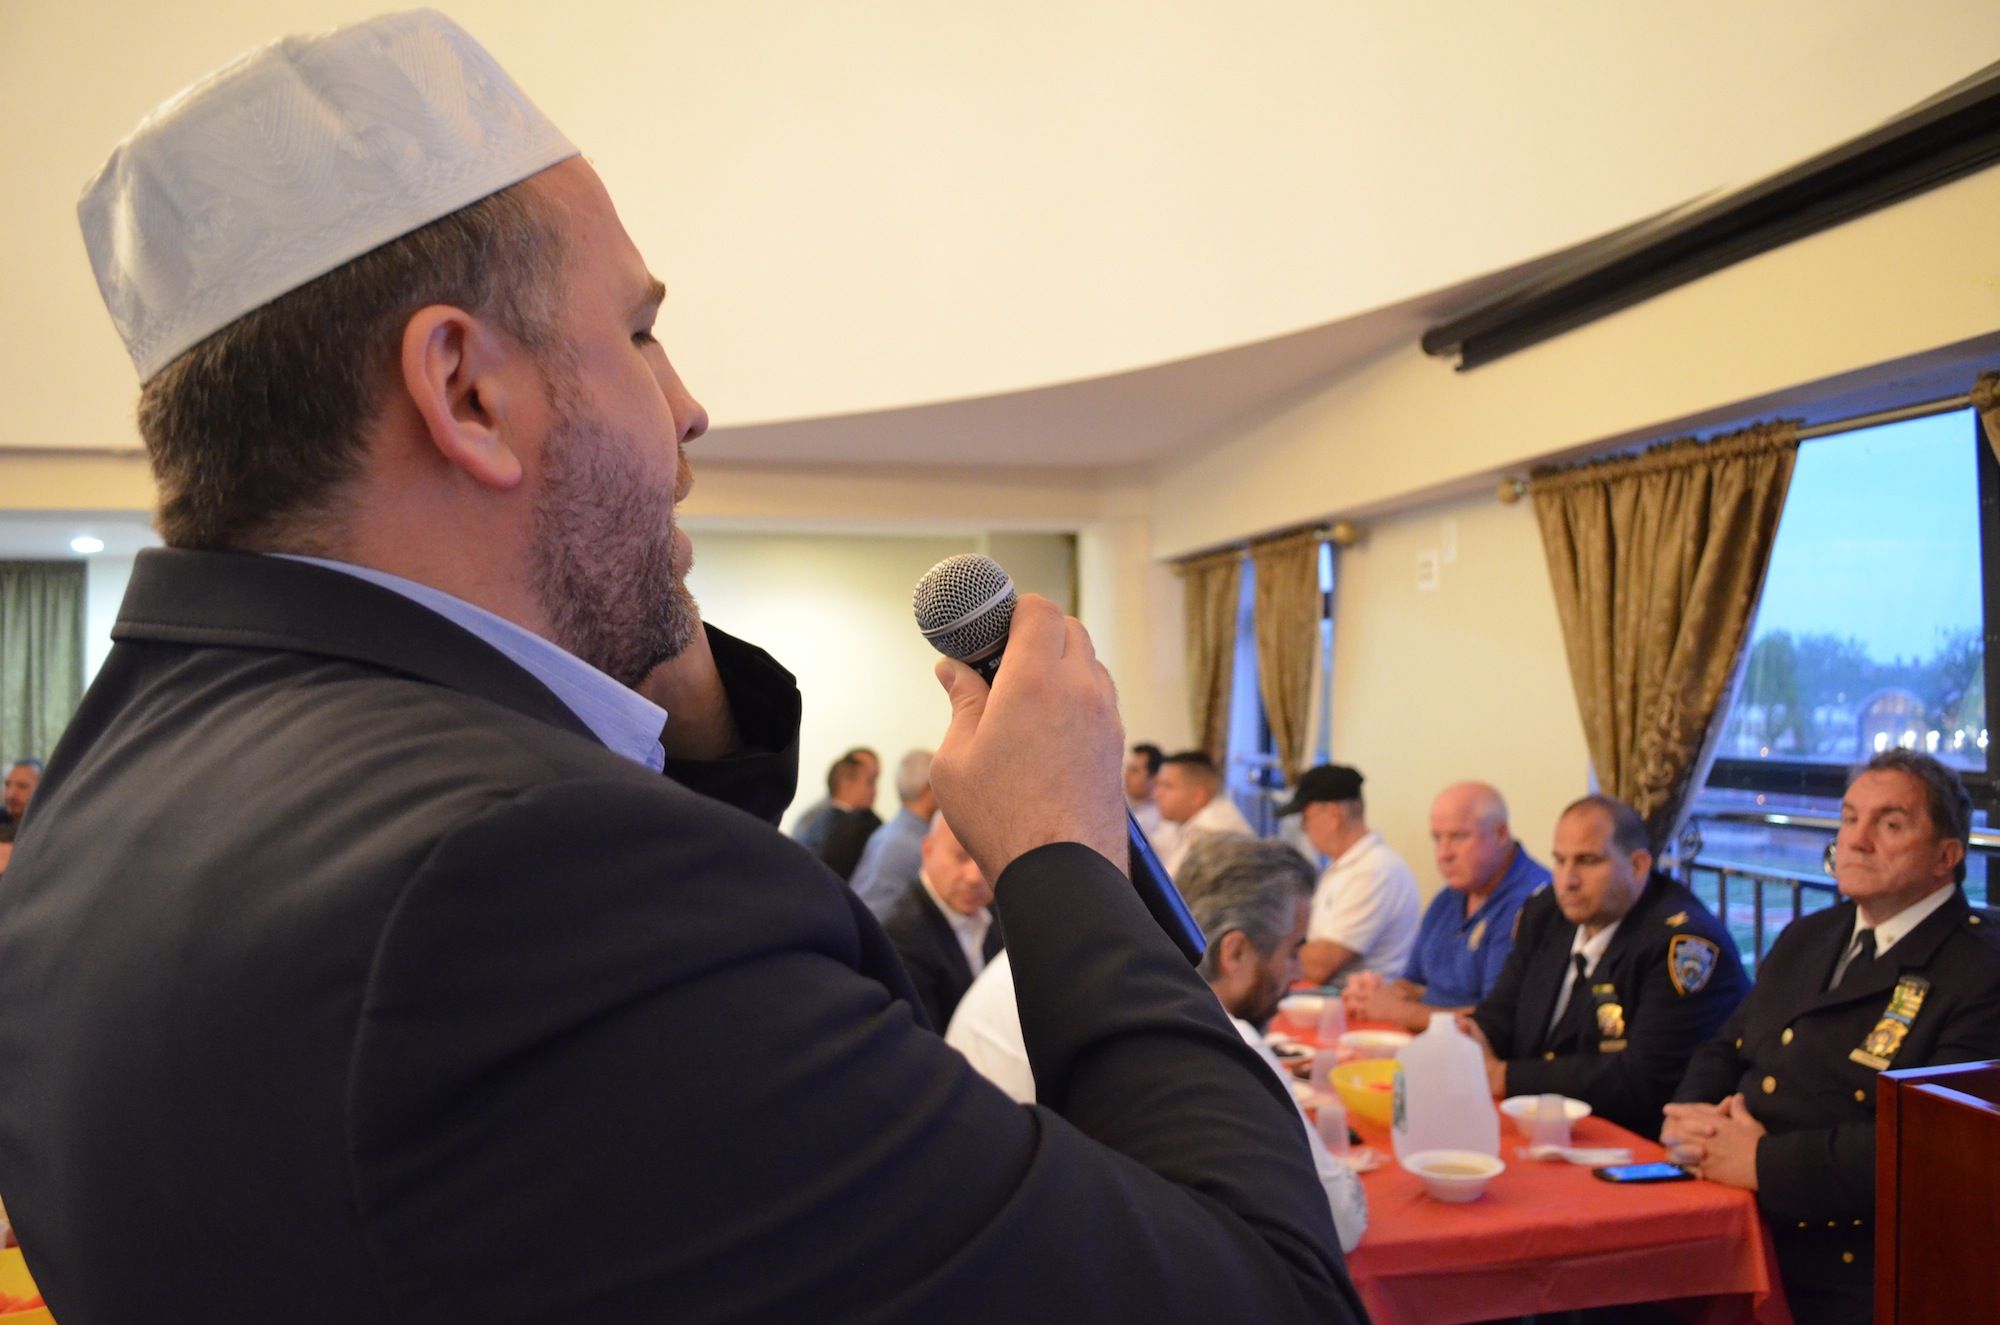 Police officers participated in an iftar dinner at the  Turkish American Eyüp Sultan Cultural Center. (Photo: Alex Ellefson / Sheepshead Bites)